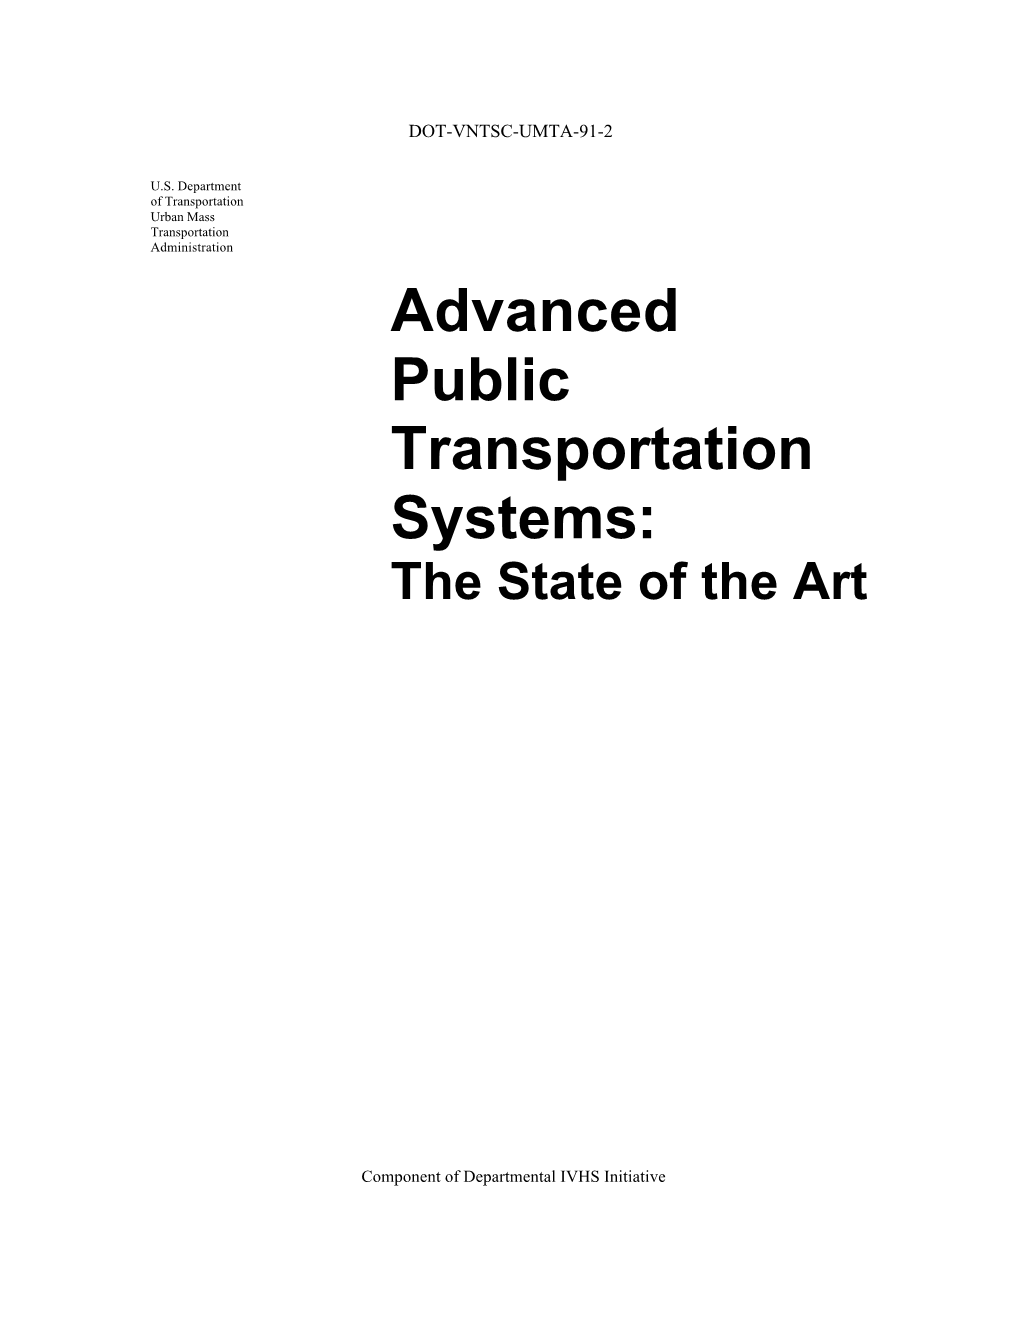 Advanced Public Transportation Systems the State of The